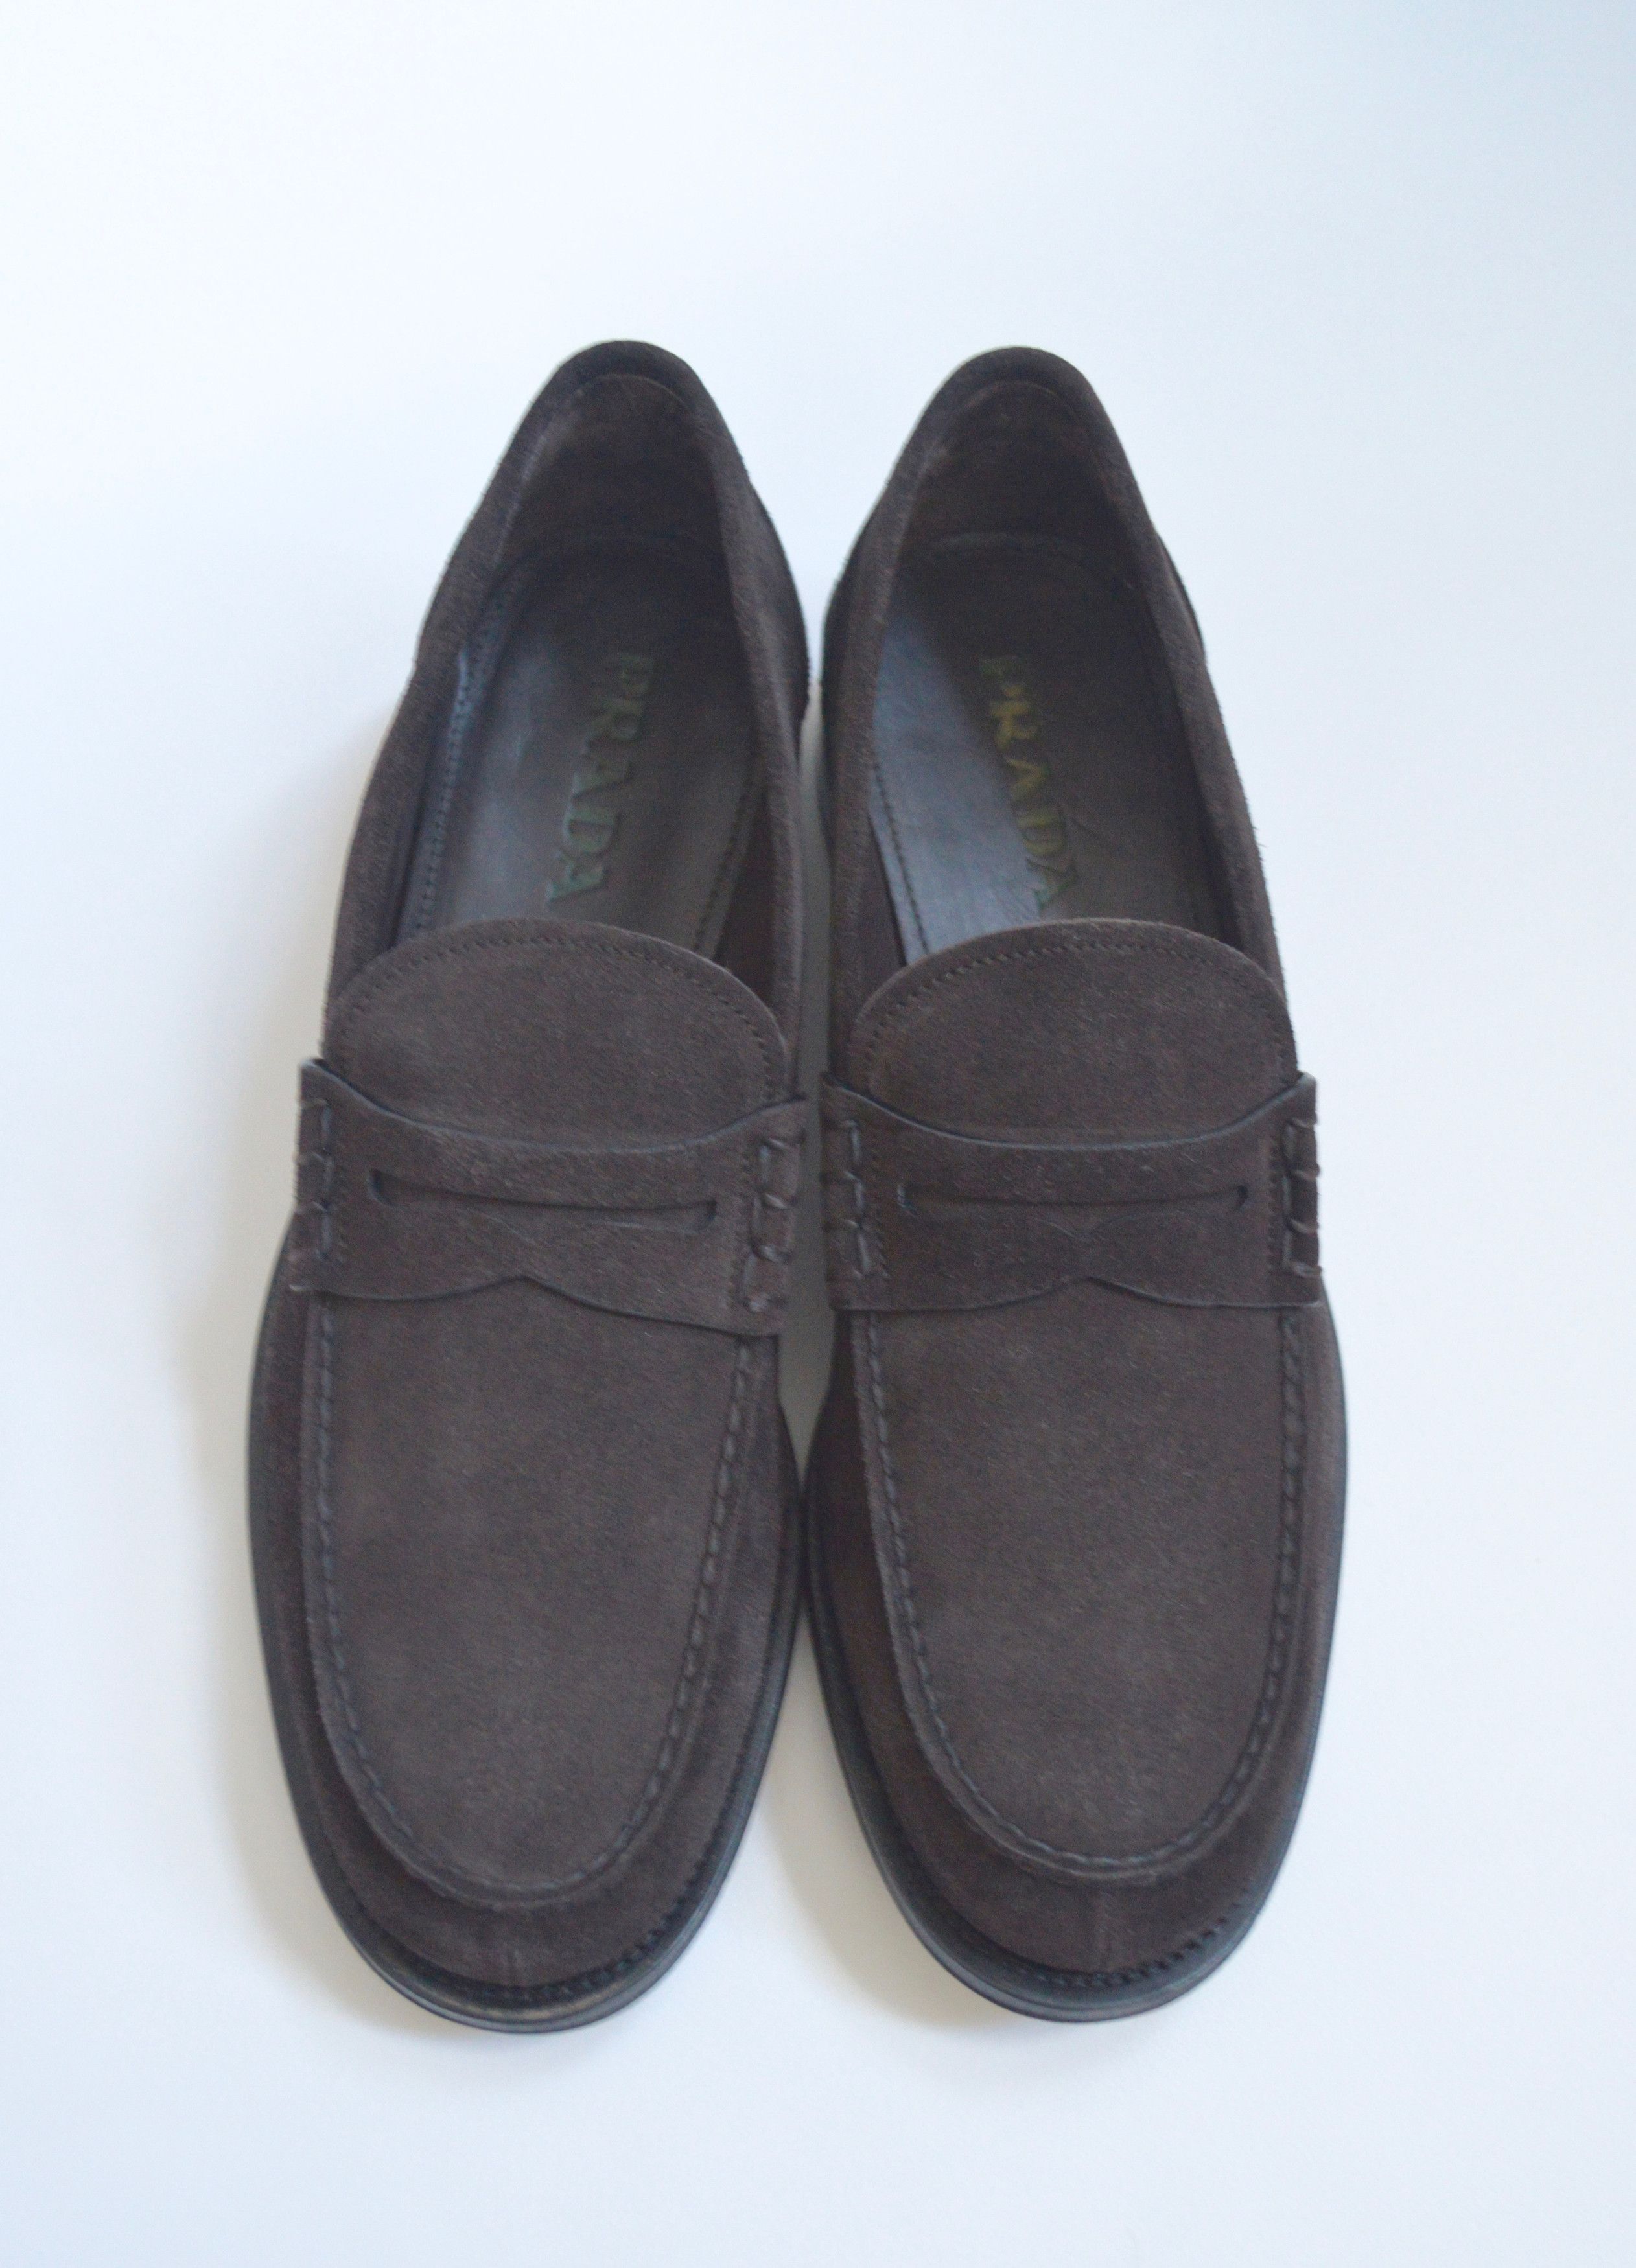 Pre-owned Prada Dark Gray Suede Loafers